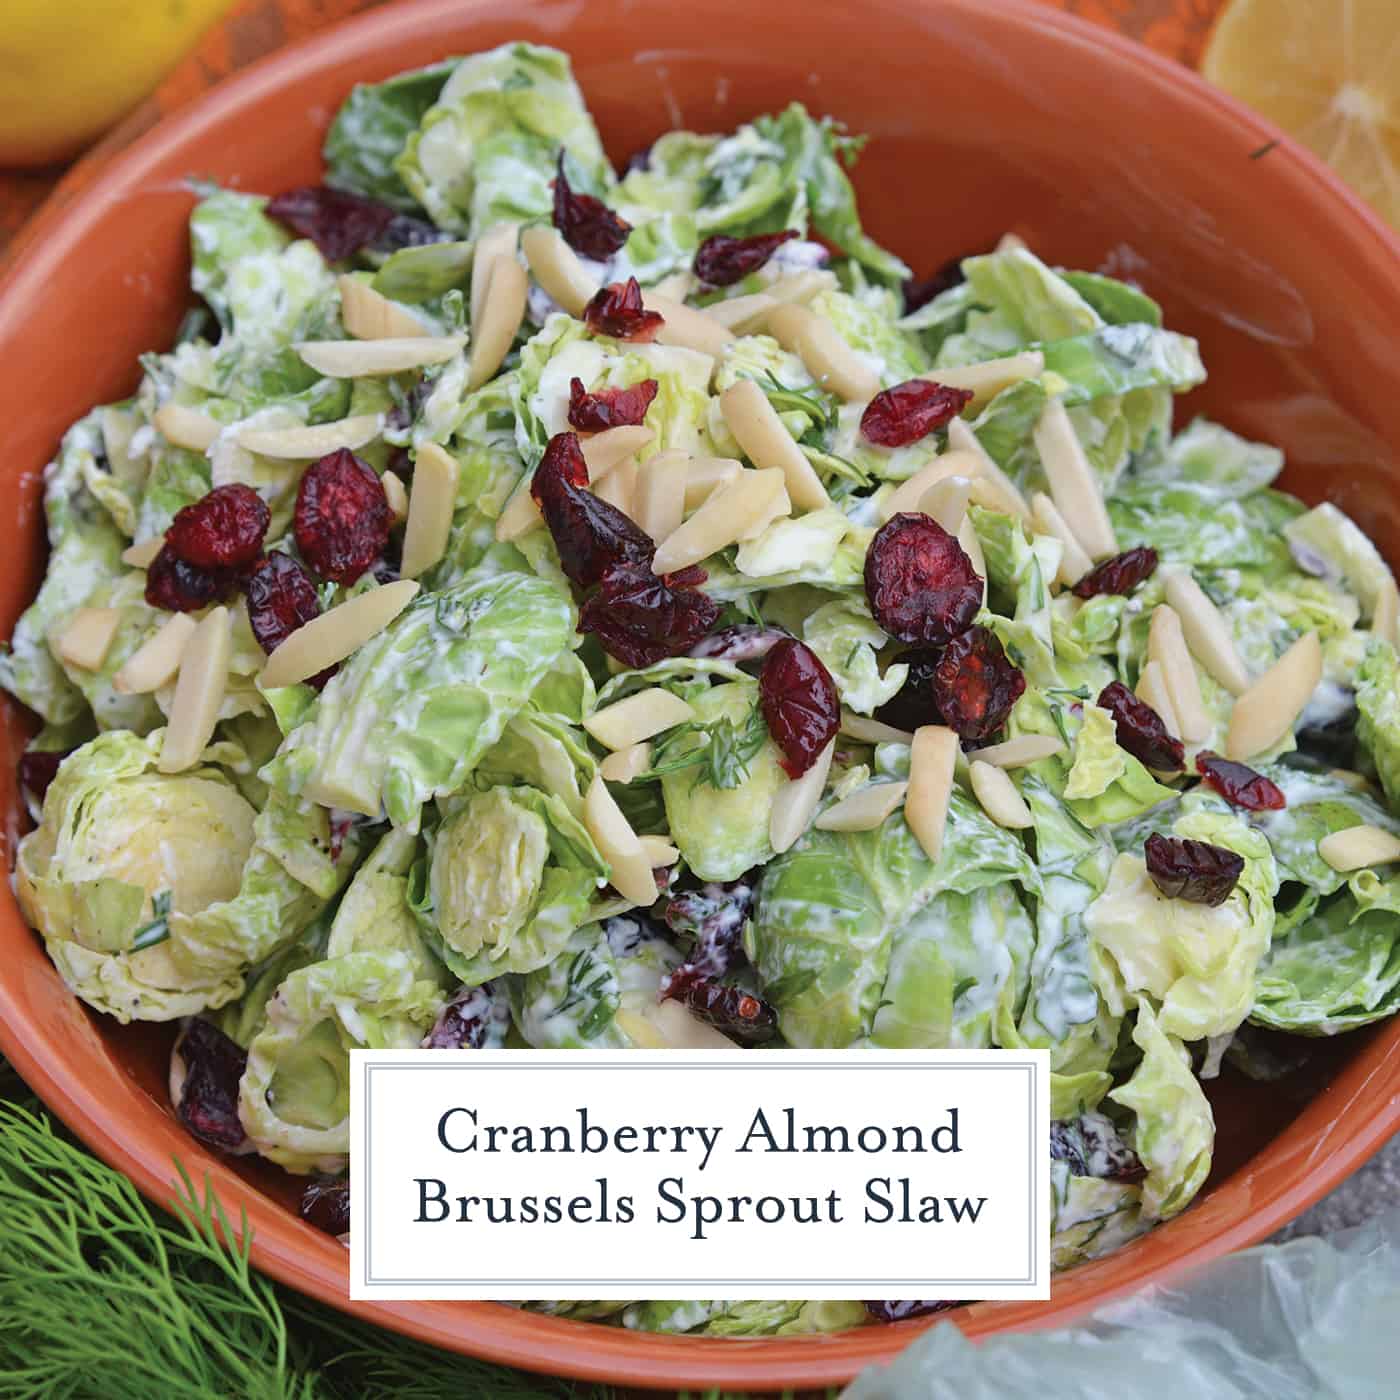 Cranberry Almond Brussel Sprout Slaw is a healthy and delicious way to eat raw brussels sprouts. Mixed with yogurt, dill, cranberry and almond, it is packed with flavor! #brusselsproutsrecipe #brusselsproutsalad www.savoryexperiments.com